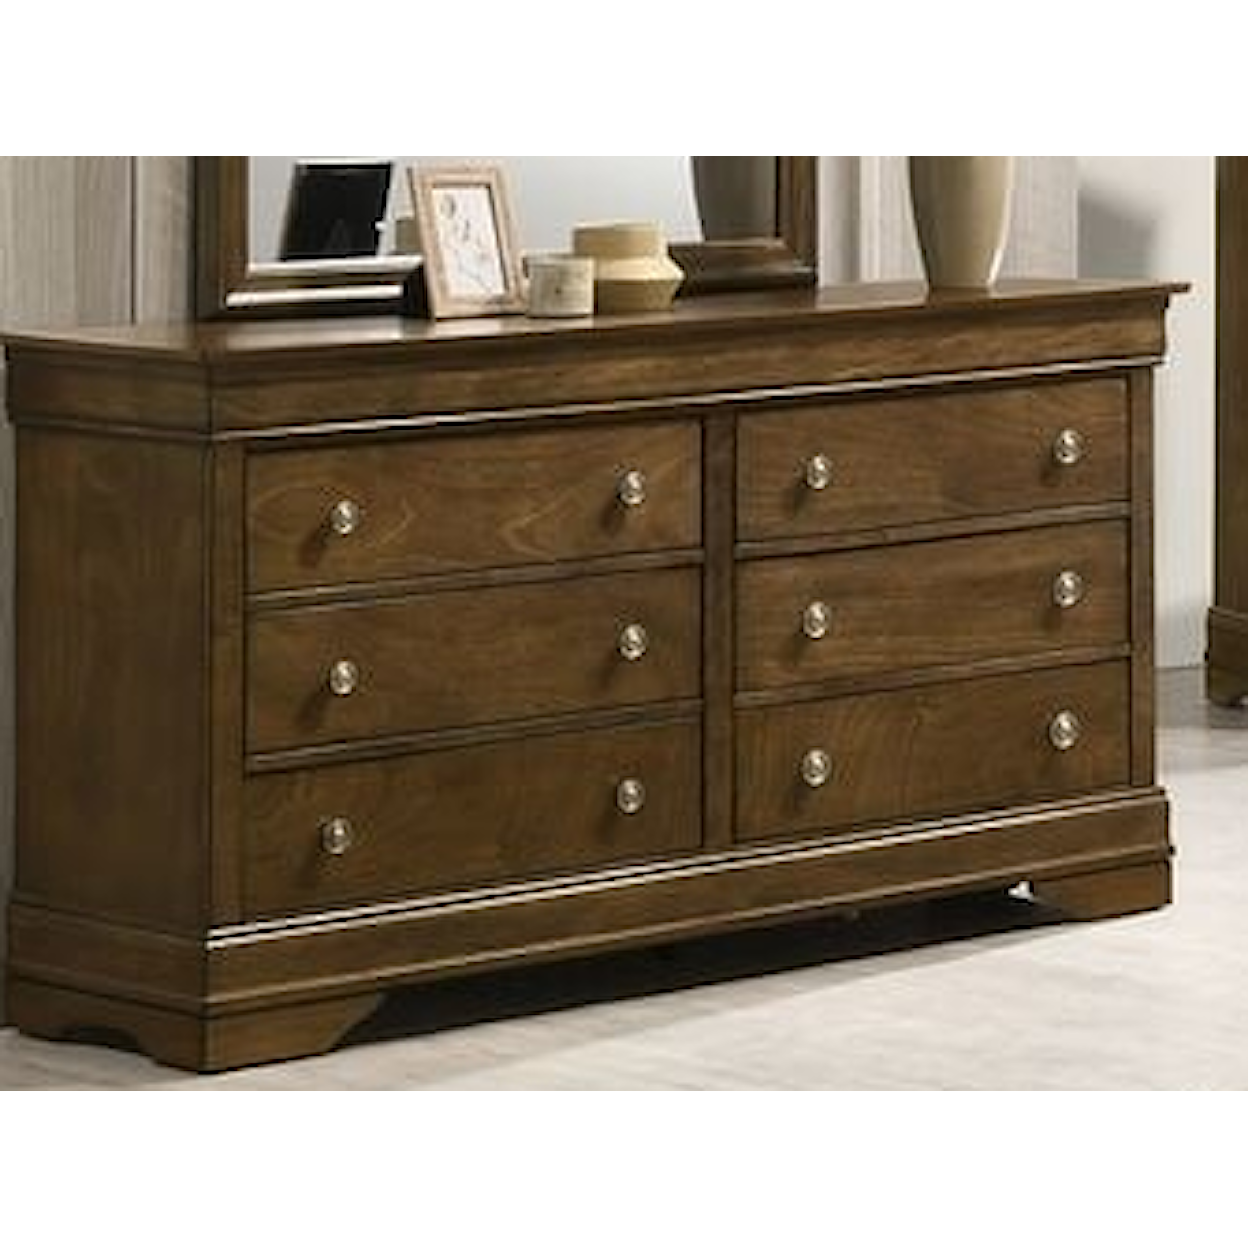 Lifestyle C0394A LOUIS PHILIPPE 6-DRAWER DRESSER